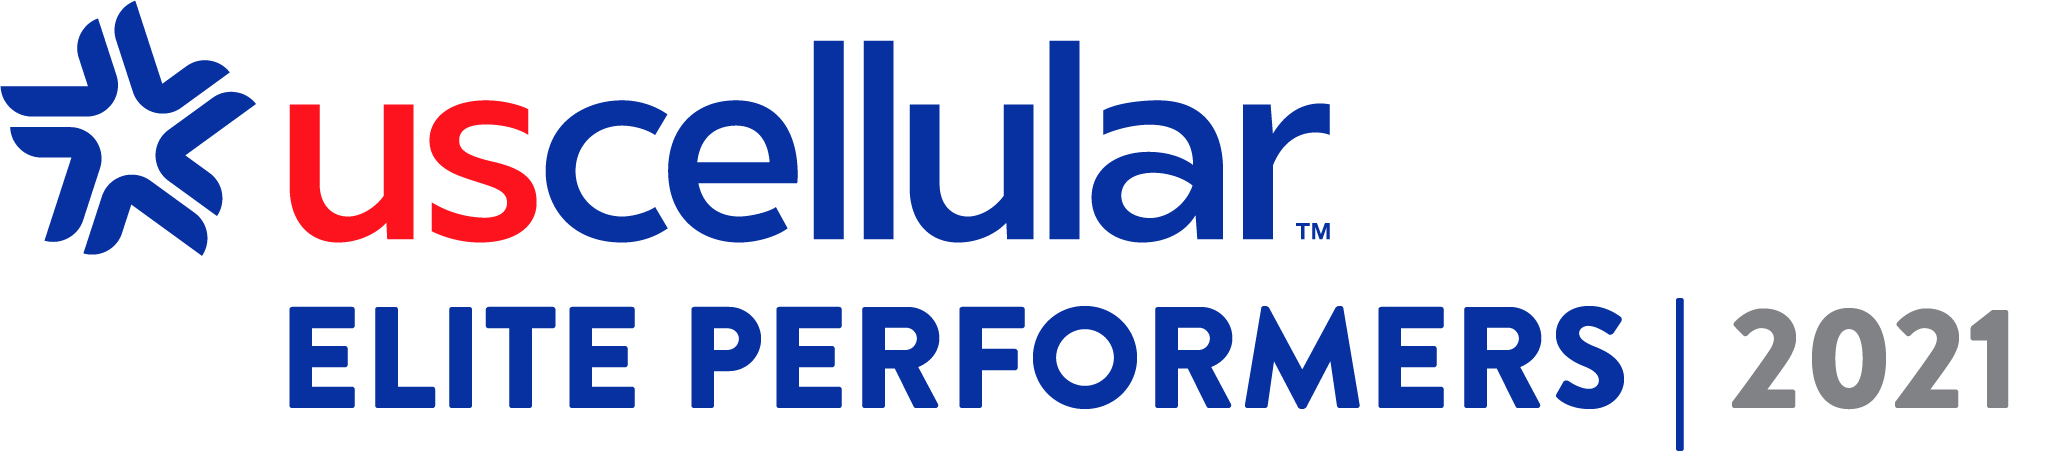 We are honored to be recognized in the Elite Performers class of 2021. This distinction is awarded to those who perform at the highest UScellular standards.